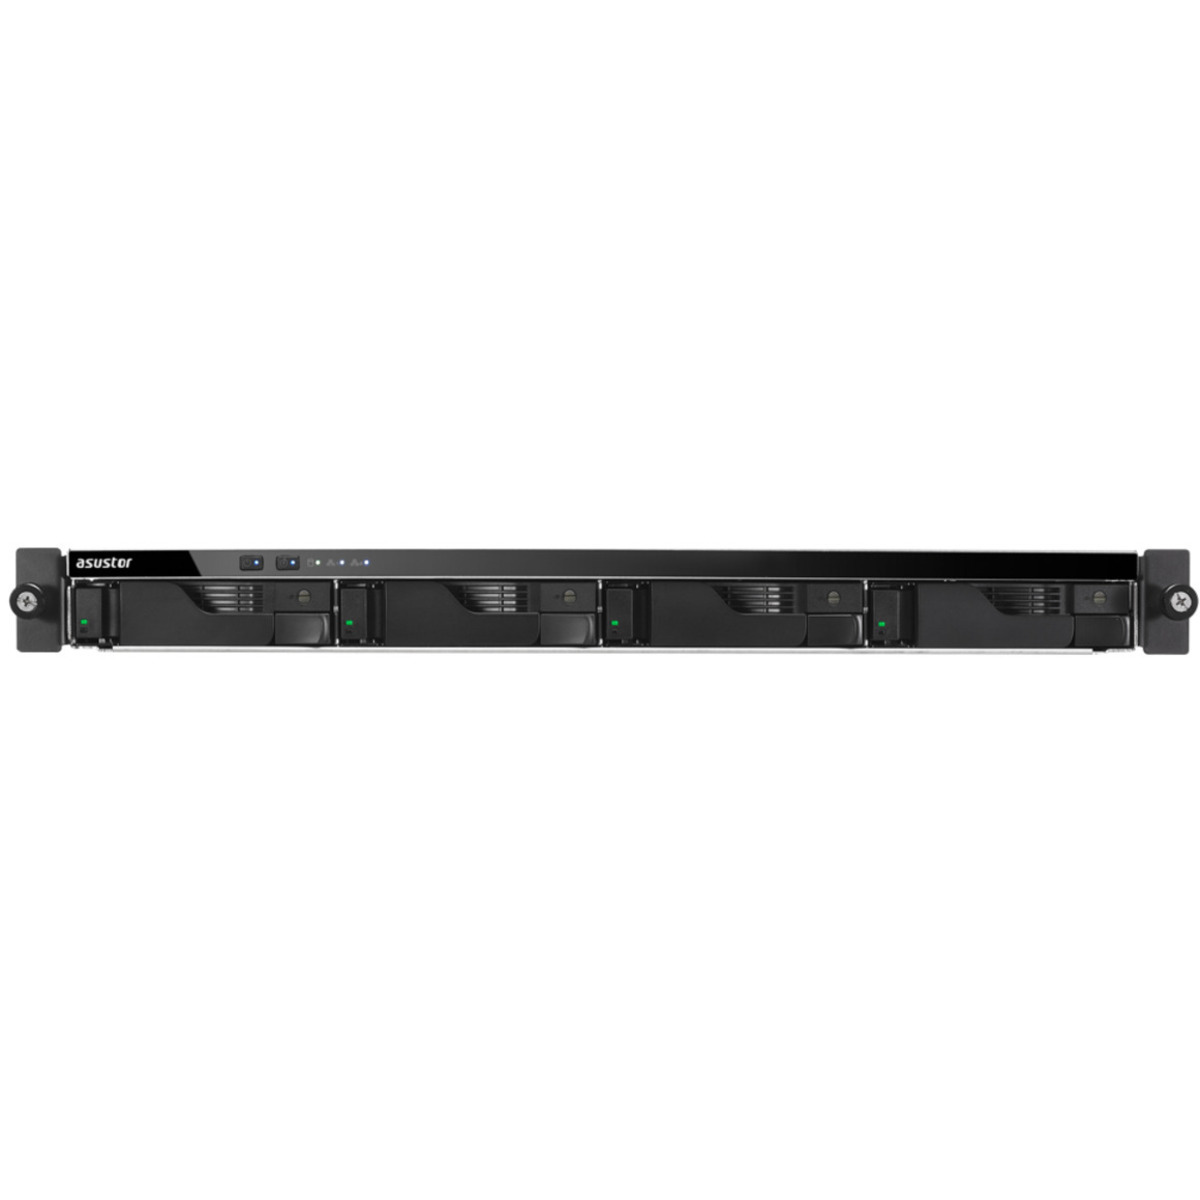 buy $1494 ASUSTOR LOCKERSTOR 4RS AS6504RS 16tb RackMount NAS - Network Attached Storage Device 4x4000gb Toshiba MN Series MN08ADA400E 3.5 7200rpm SATA 6Gb/s HDD NAS Class Drives Installed - Burn-In Tested - ON SALE - FREE RAM UPGRADE - nas headquarters buy network attached storage server device das new raid-5 free shipping simply usa LOCKERSTOR 4RS AS6504RS